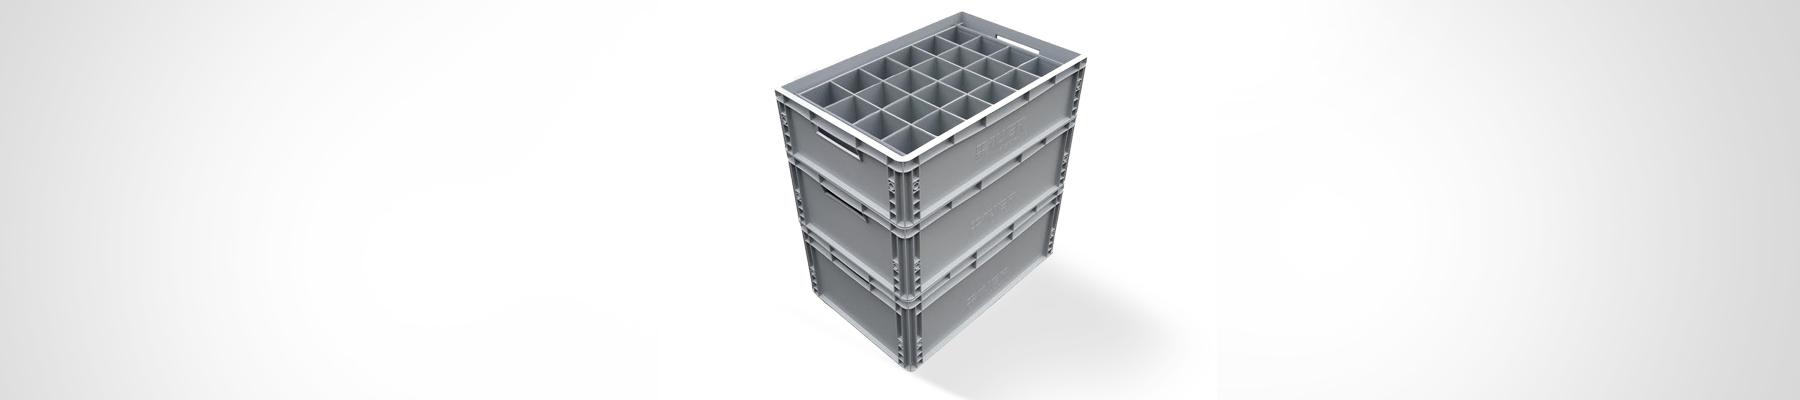 euro_crate glass storage container